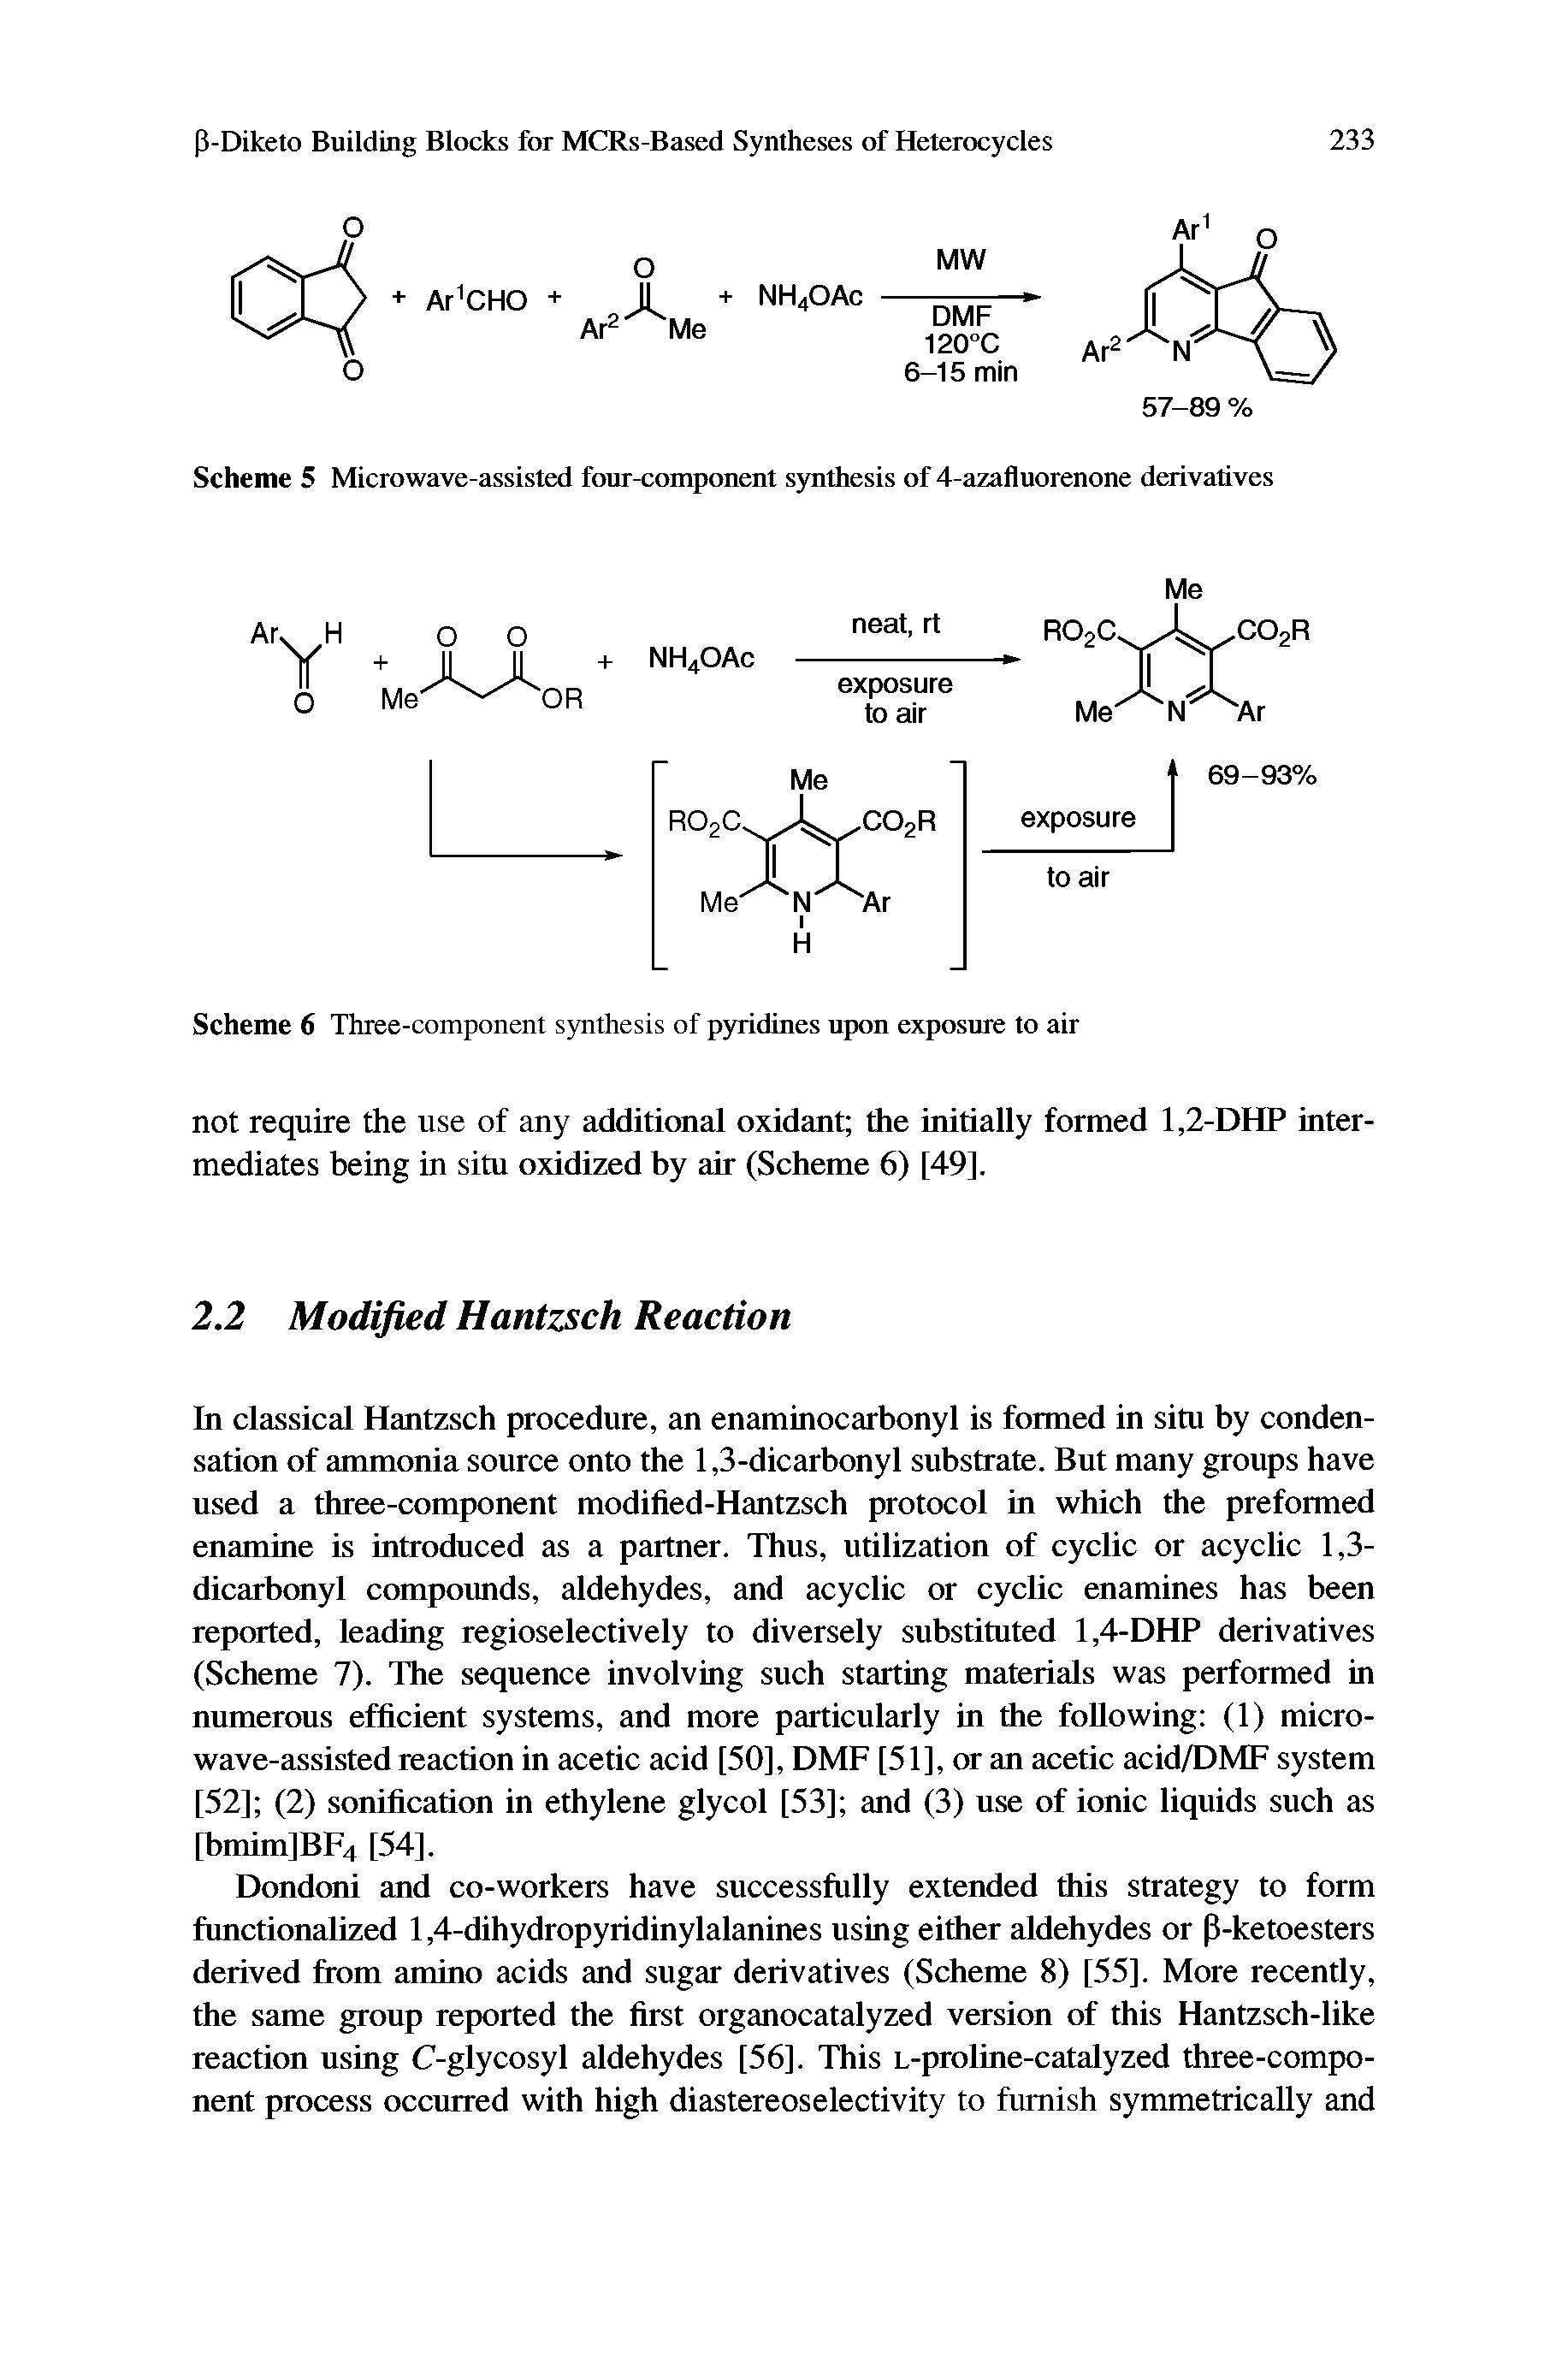 Scheme 6 Three-component synthesis of pyridines upon exposure to air...